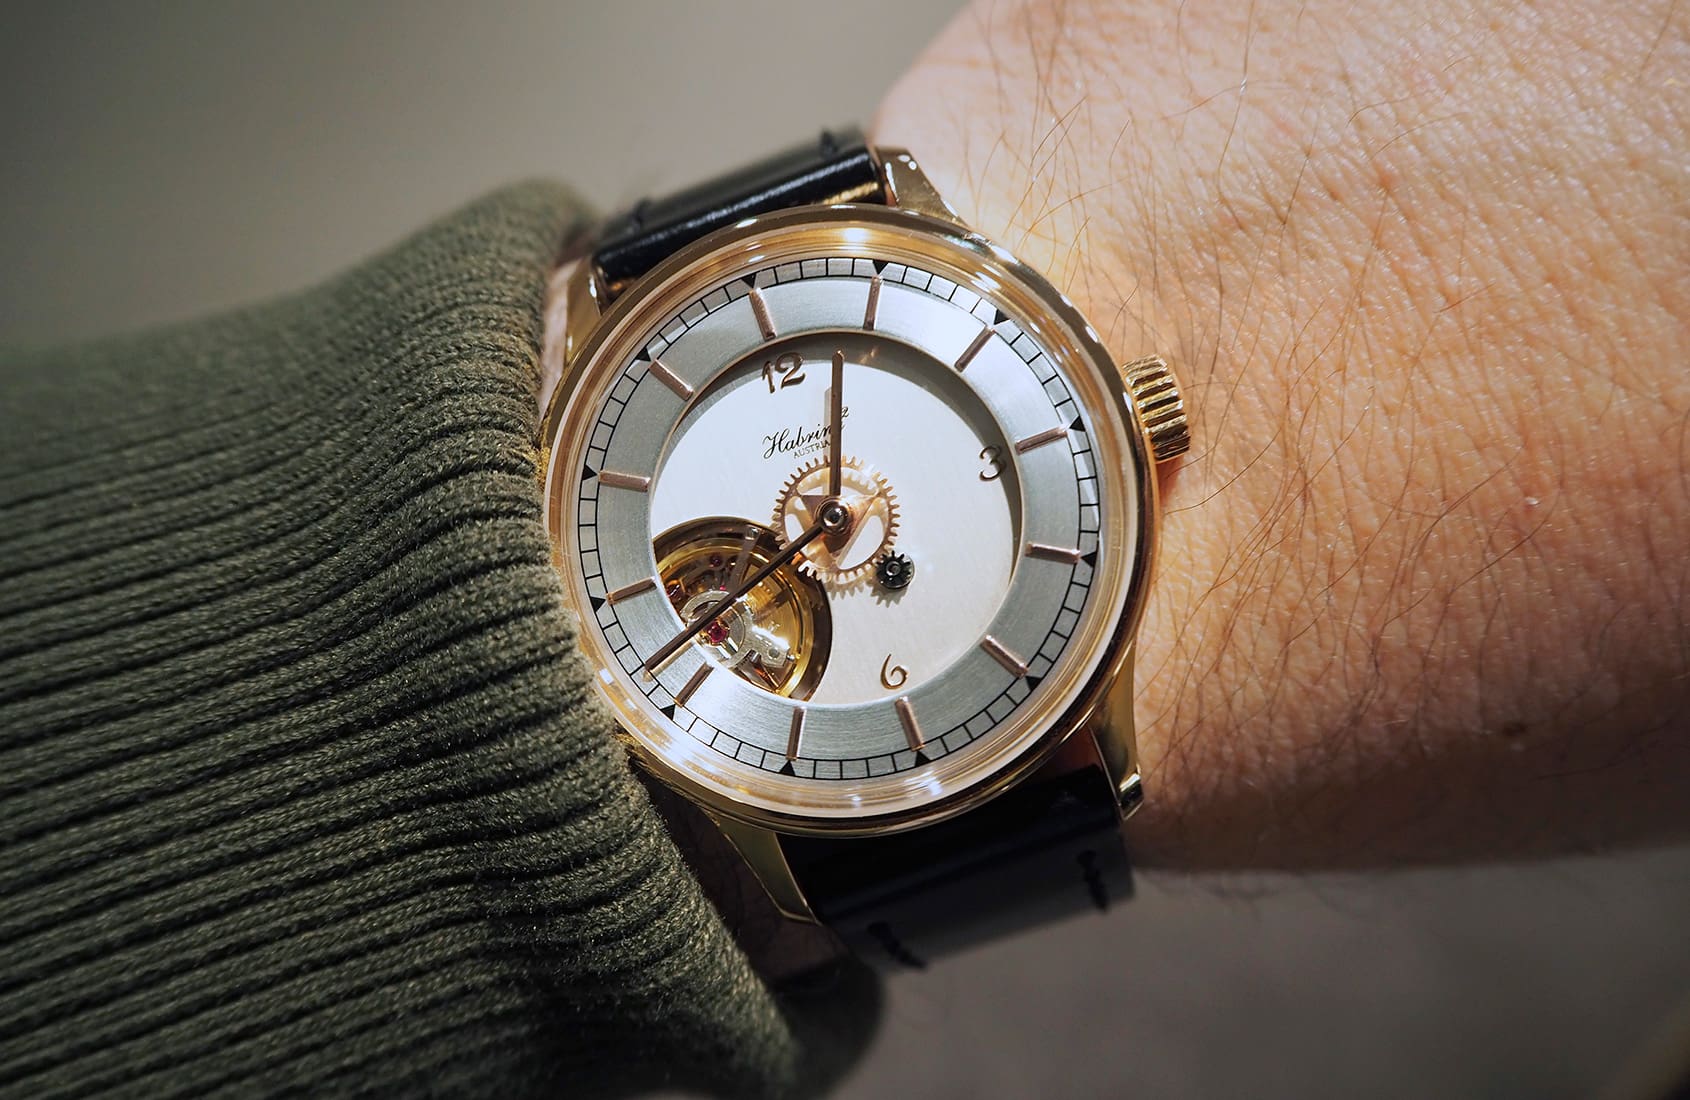 NEWS: If you’ve ever wanted to buy a gold tourbillon for $3000 you might just be in luck